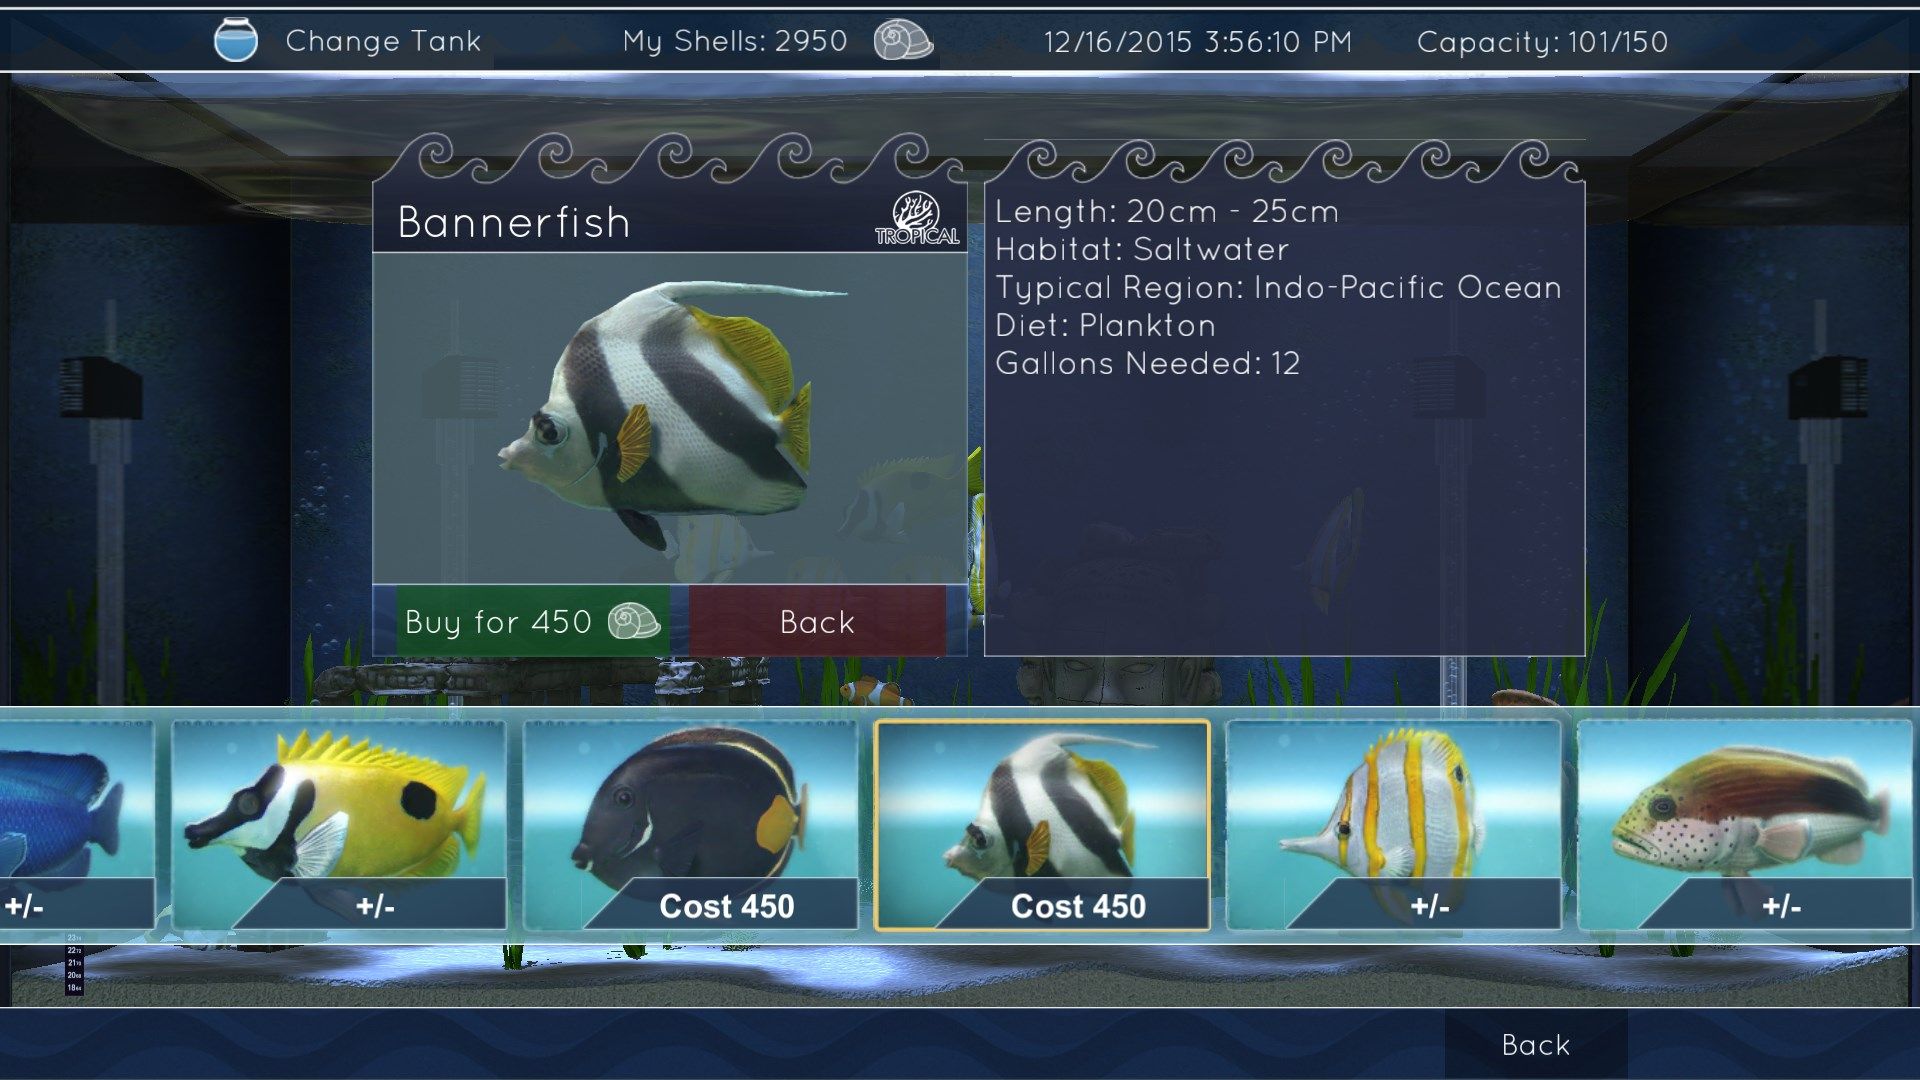 Find out information on fish before adding them to your scene!